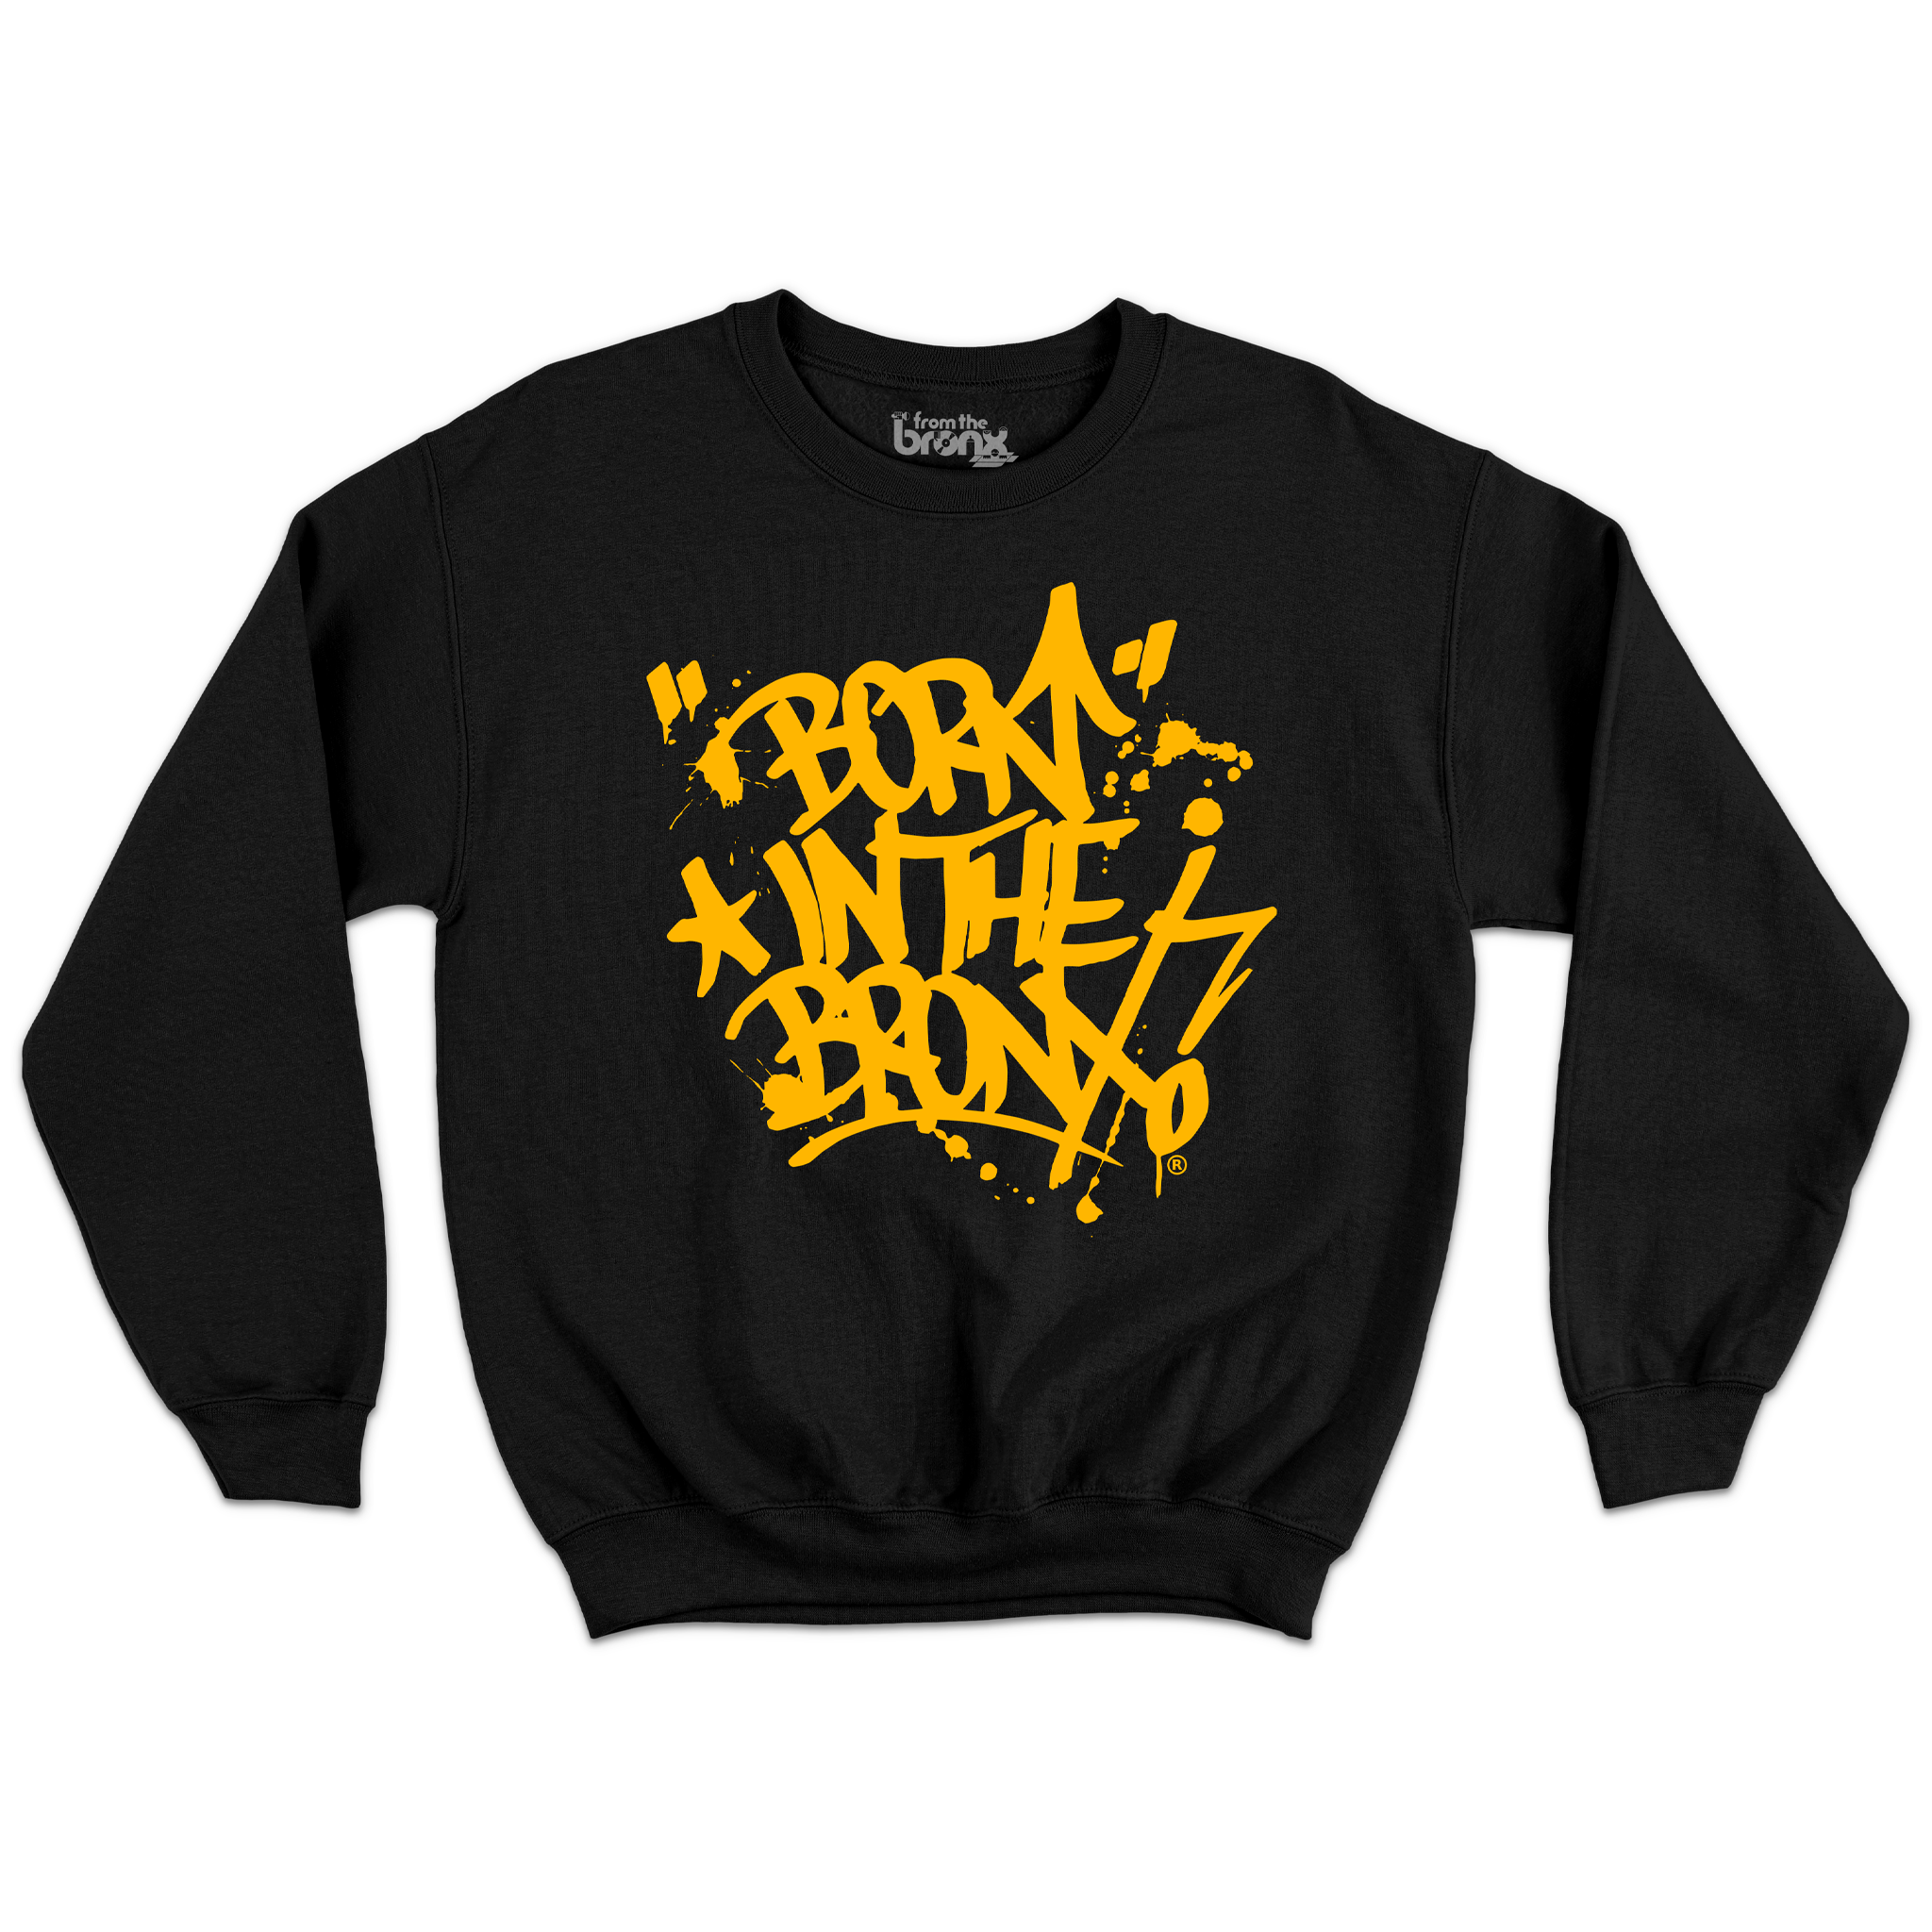 "Born" in The Bronx! Paint Splatter T-Shirt Front in Gold on Black